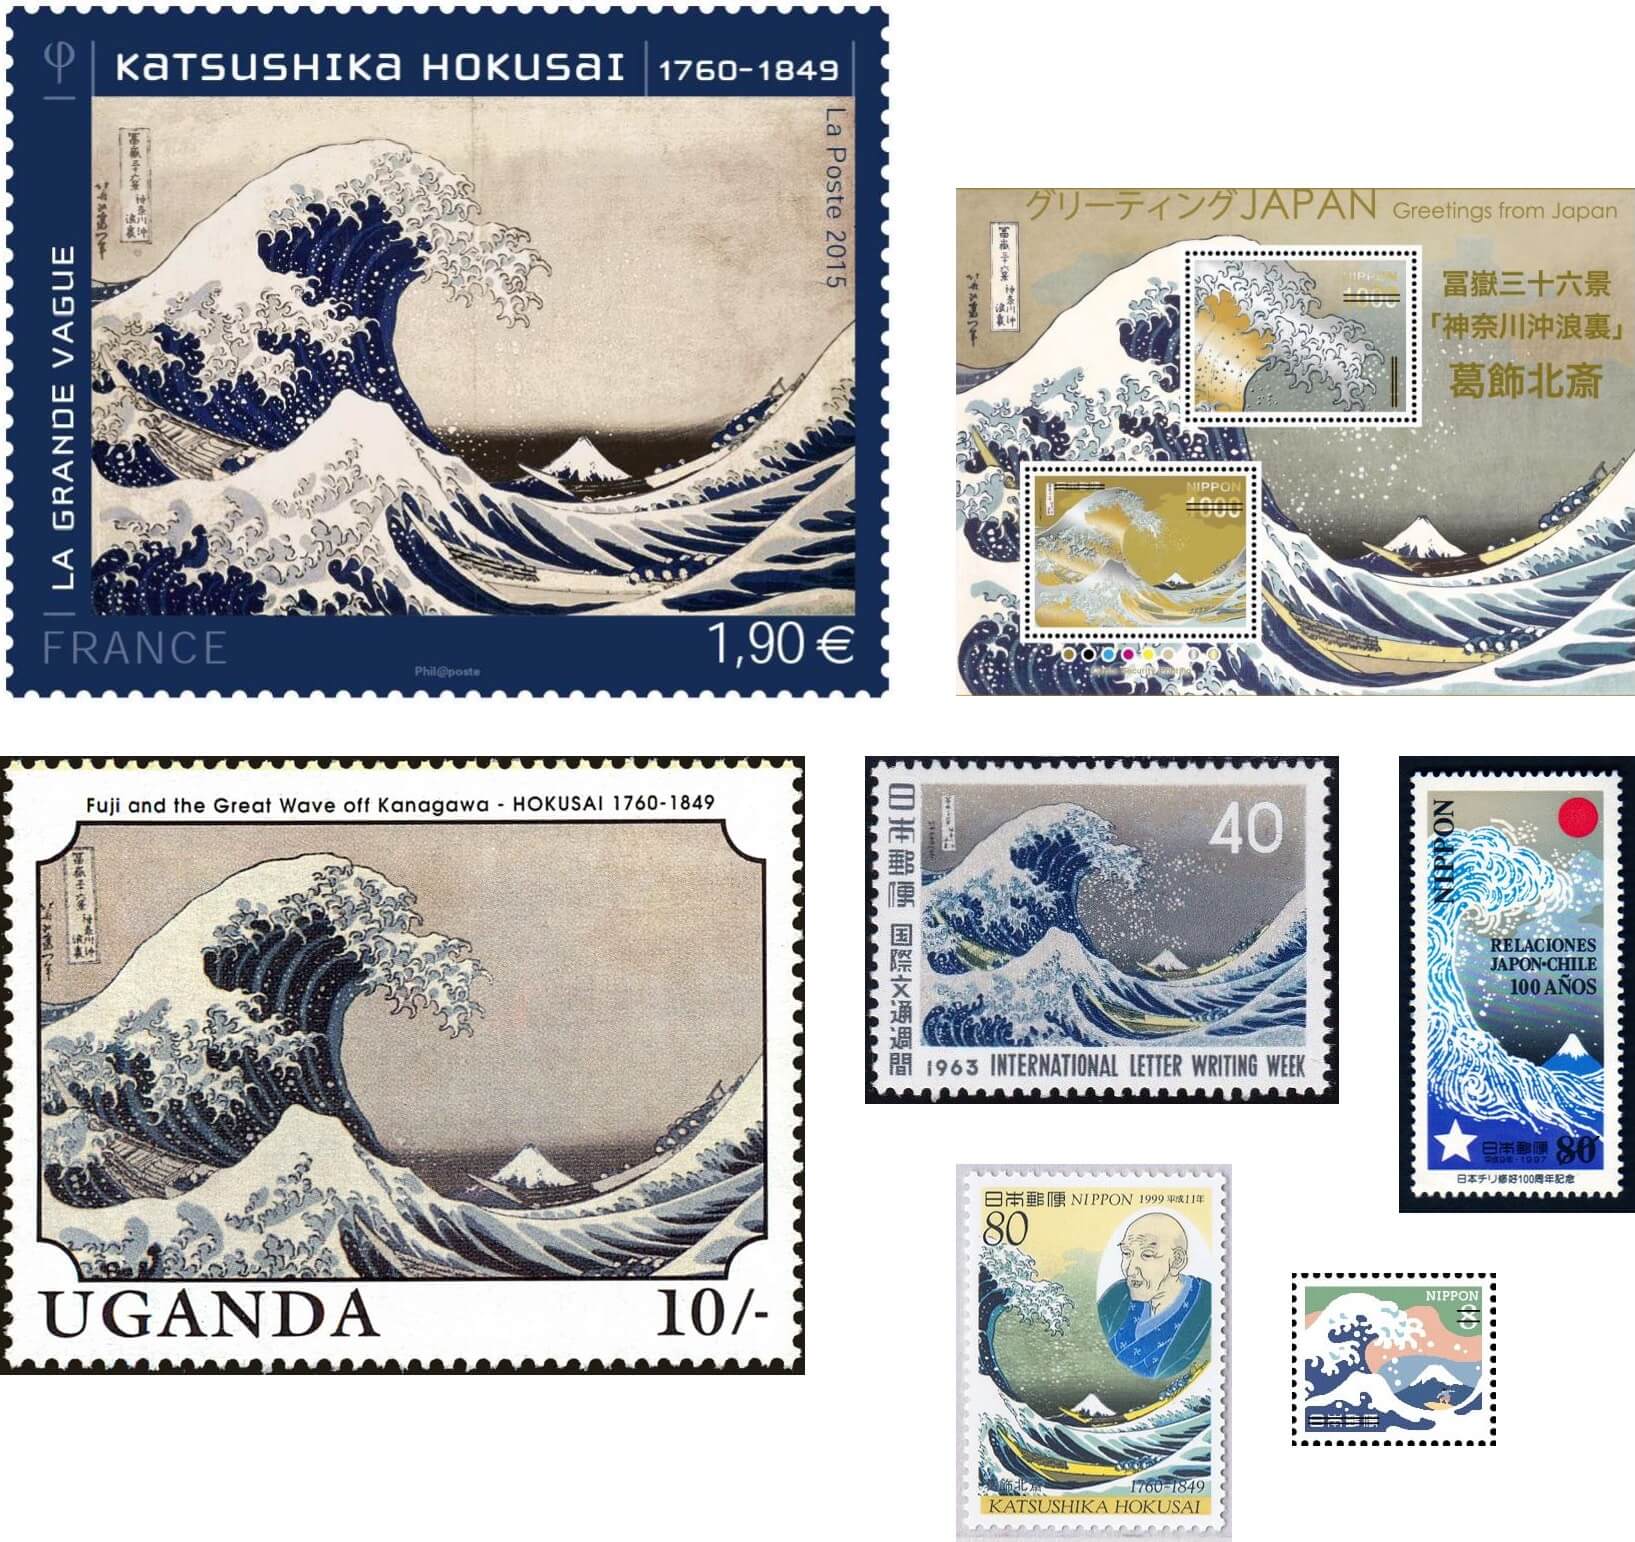 Stamps featuring The Great Wave off Kanagawa